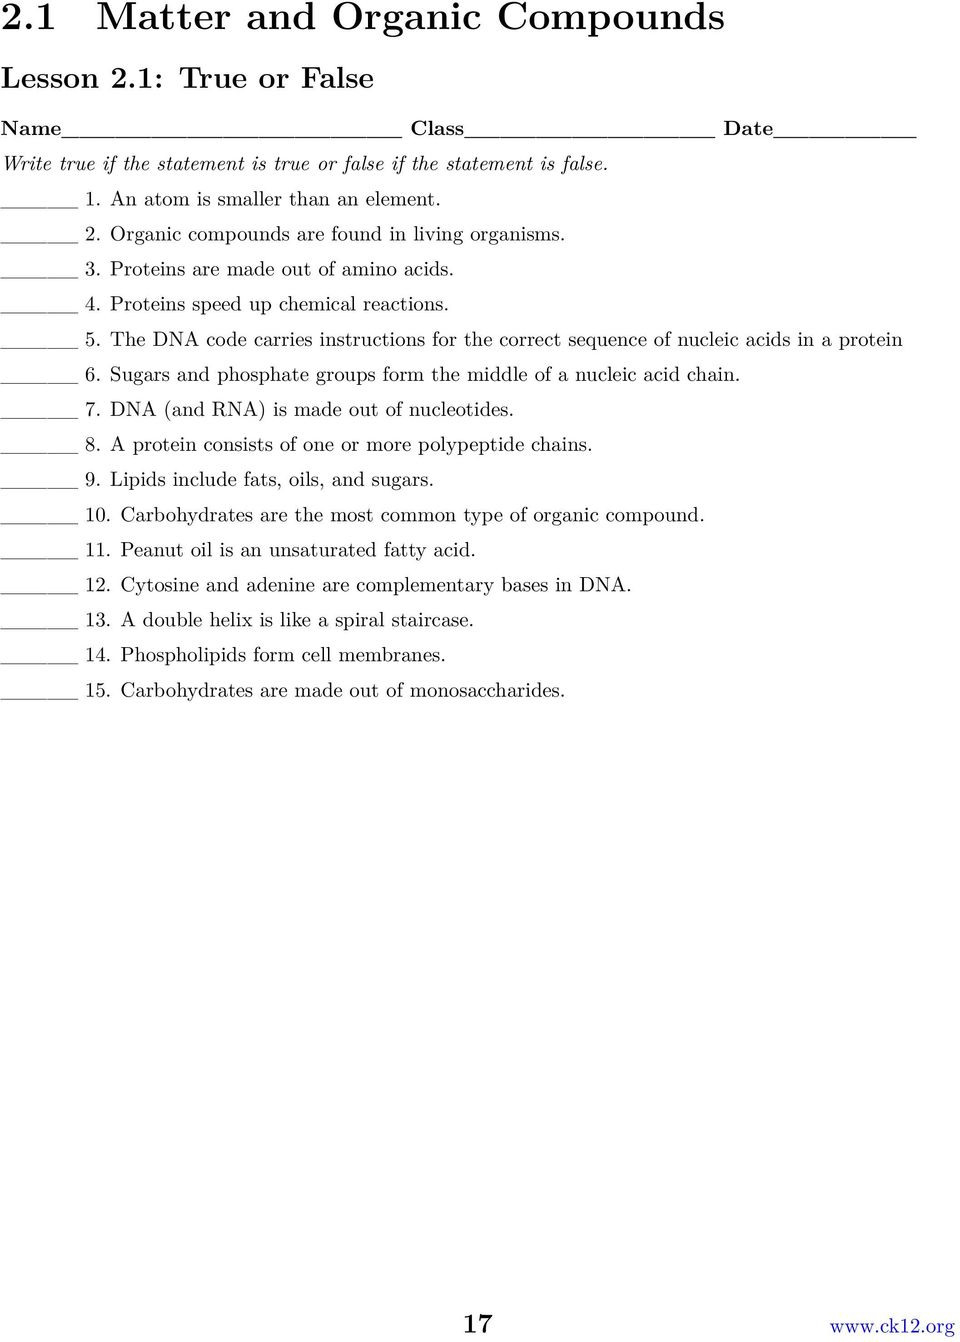 Chapter 2 The Chemistry Of Life Worksheets  Pdf